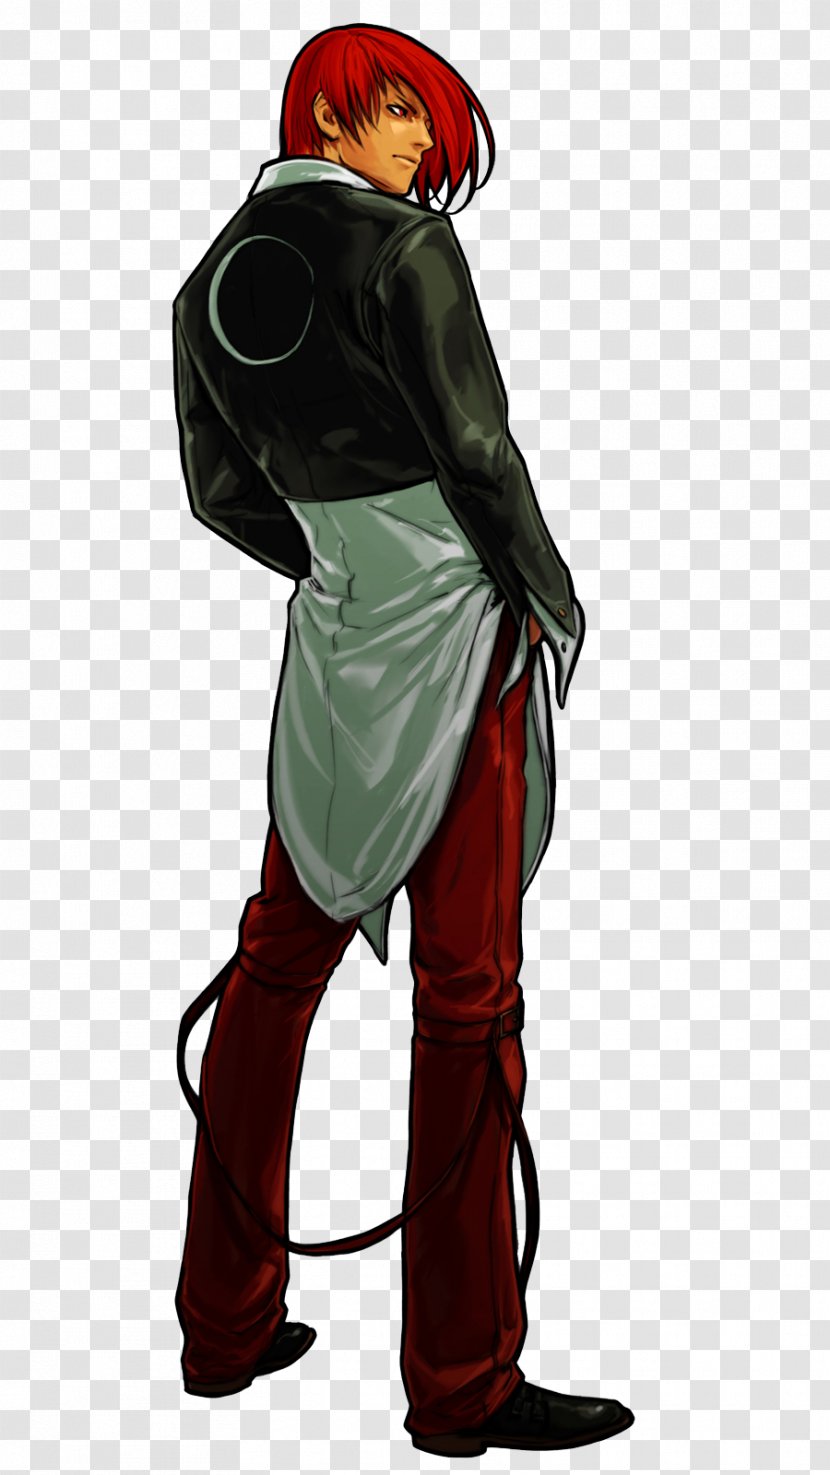 The King Of Fighters XIII Iori Yagami '95 - 2002 Transparent PNG